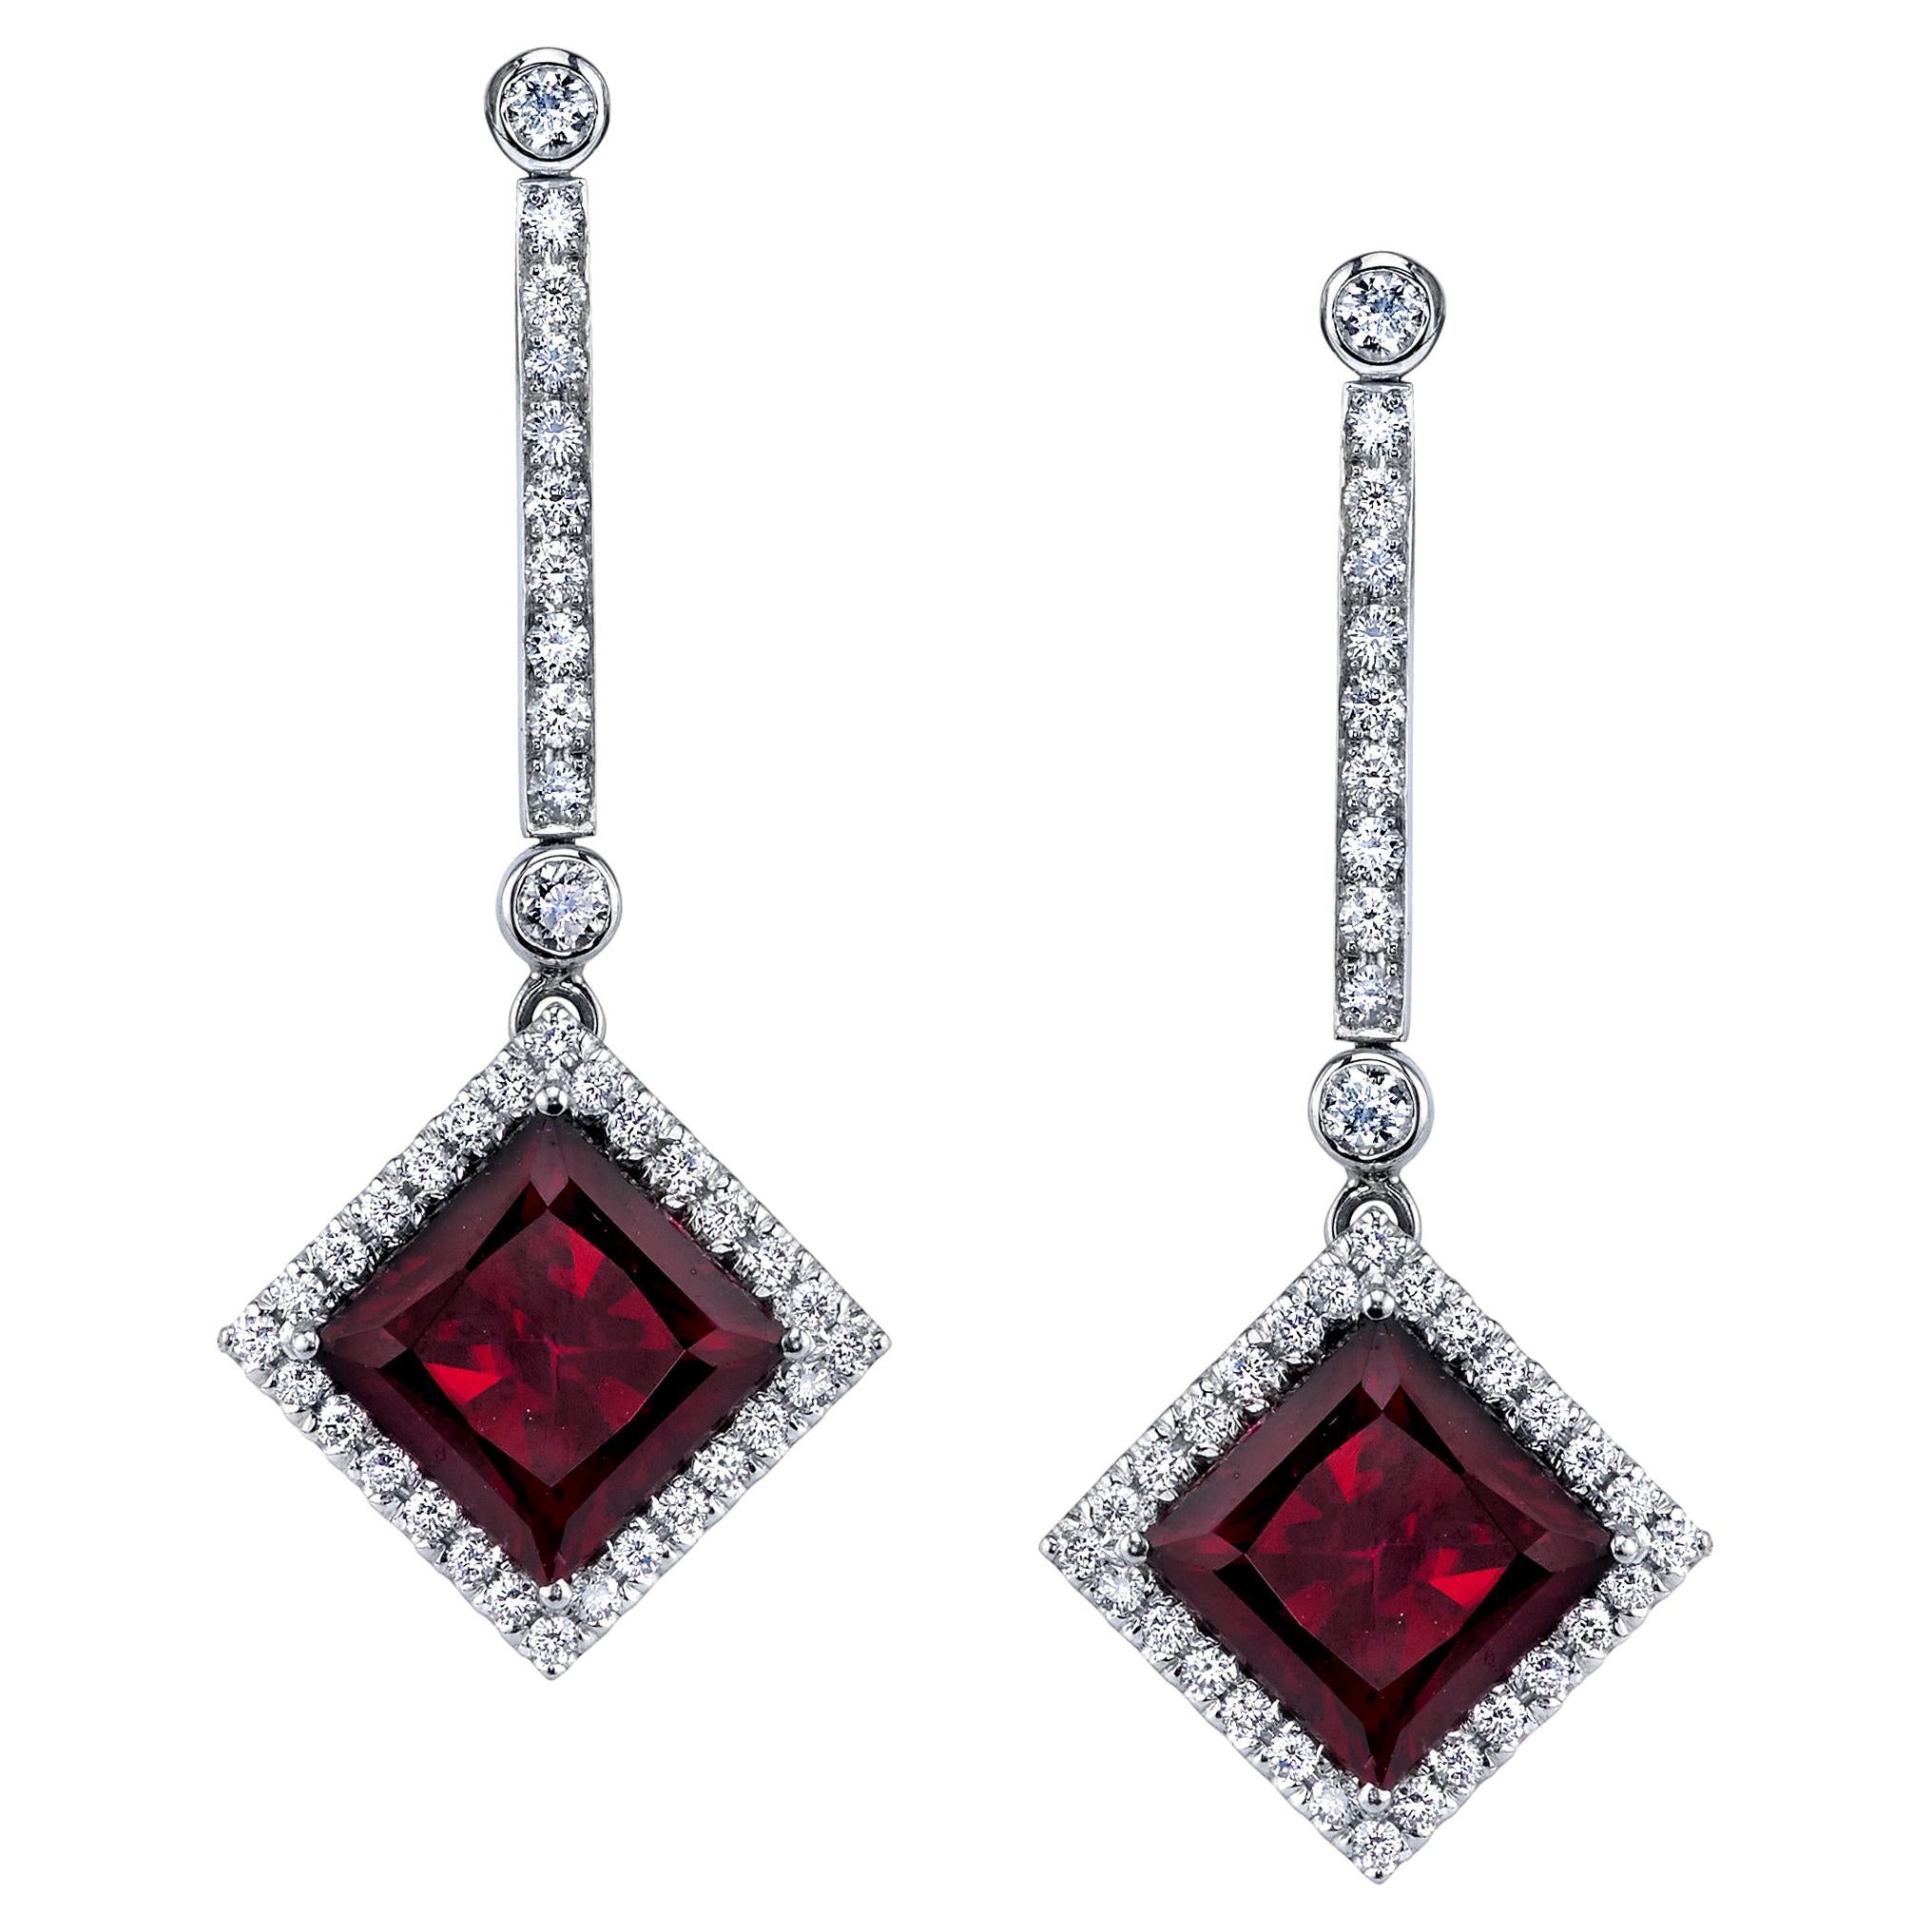  Red Tourmaline and Diamond Dangle Earrings in White Gold, 6.50 Carats Total